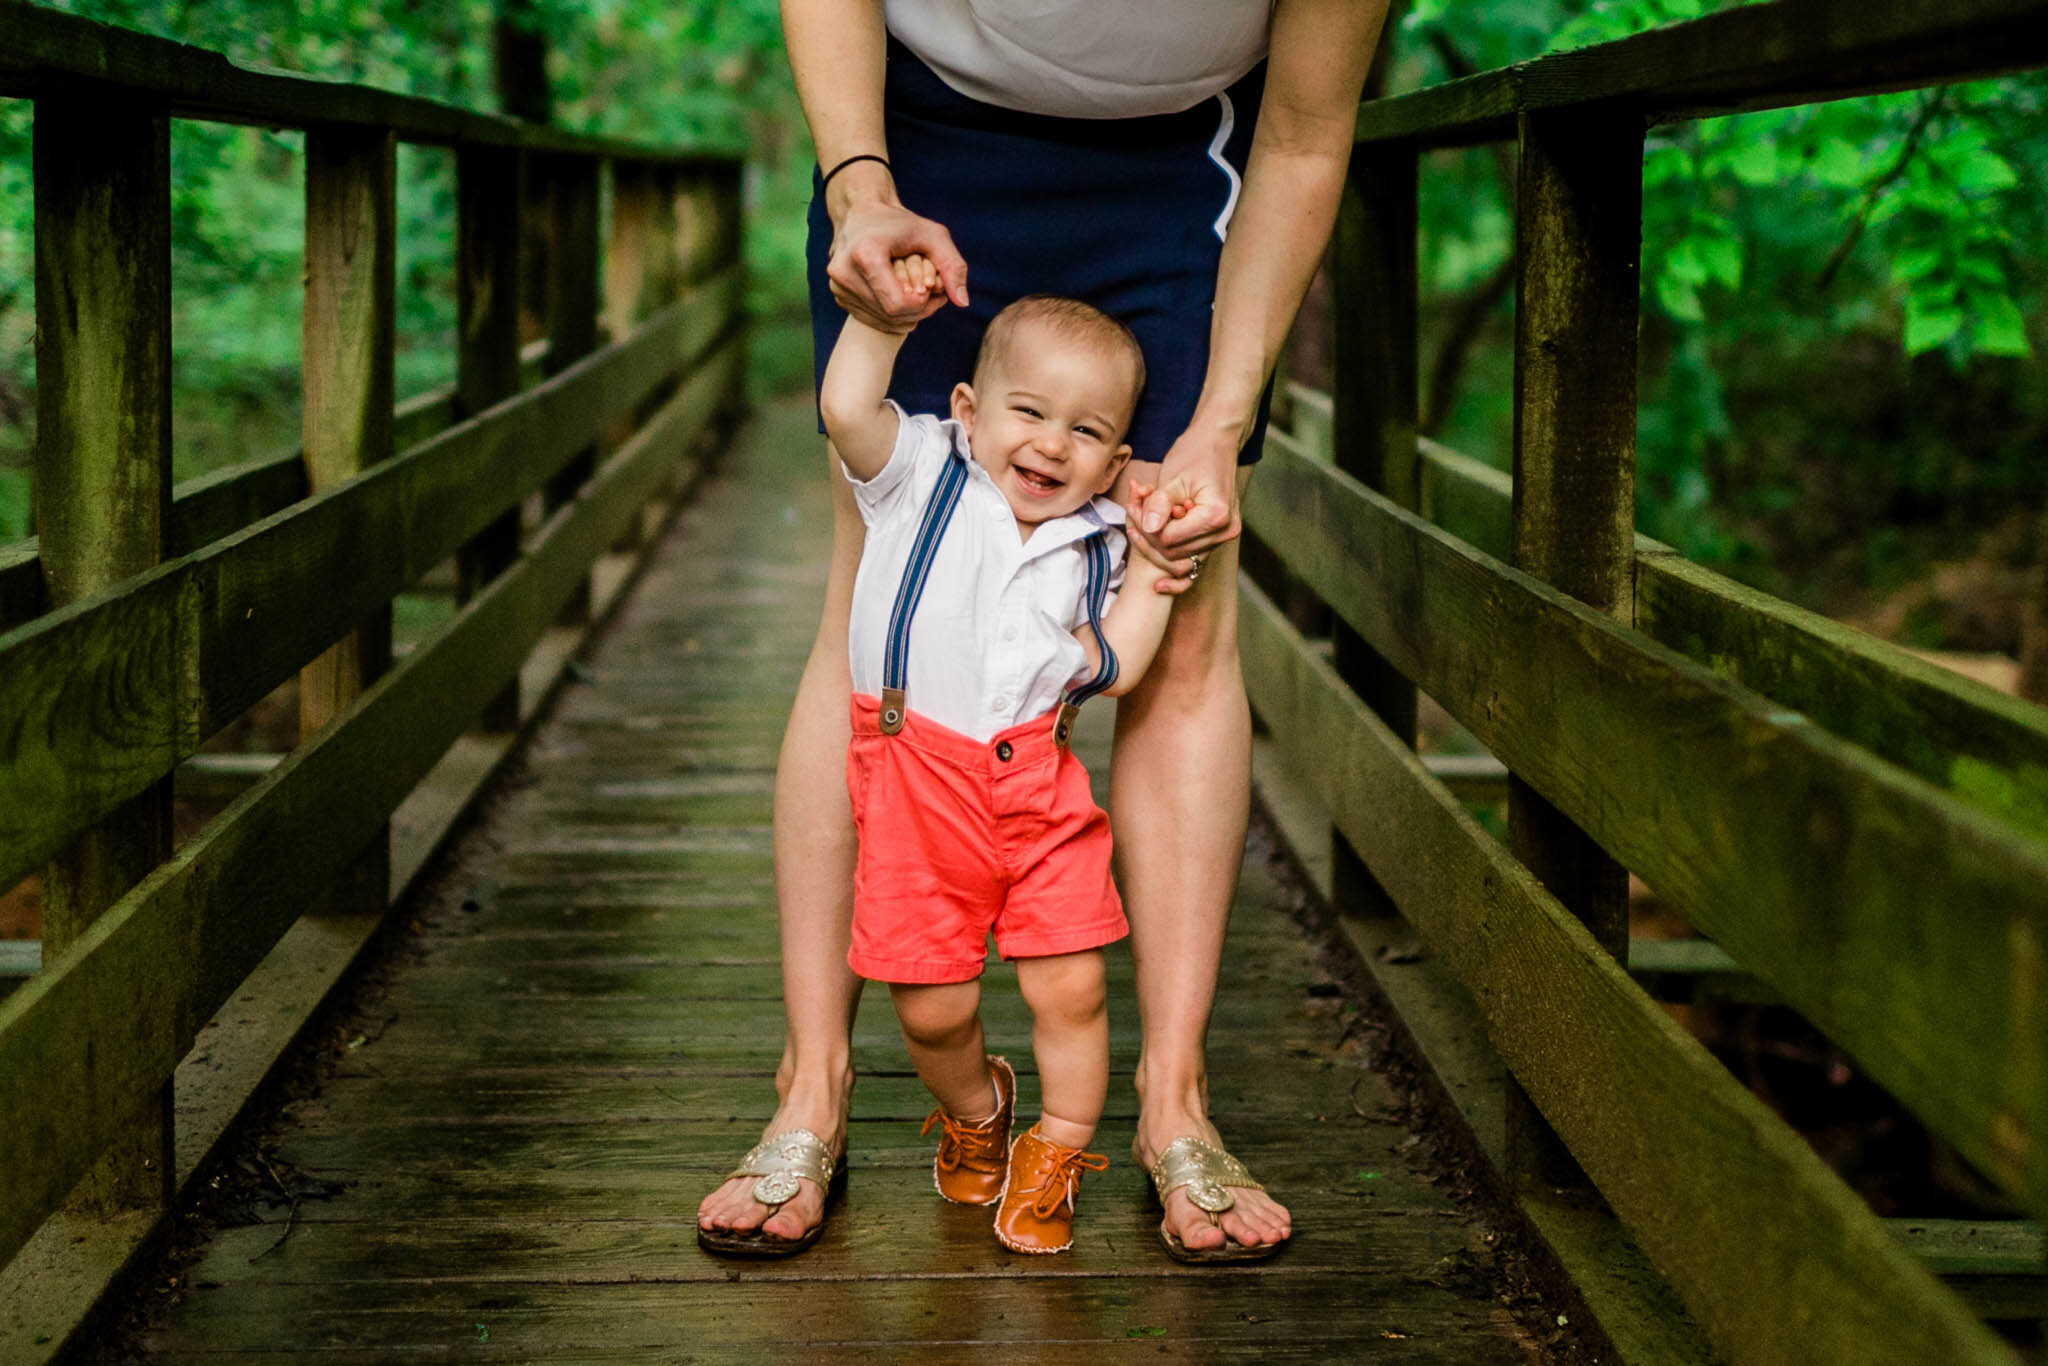 Raleigh Family Photographer | By G. Lin Photography | Young baby boy learning to walk outside